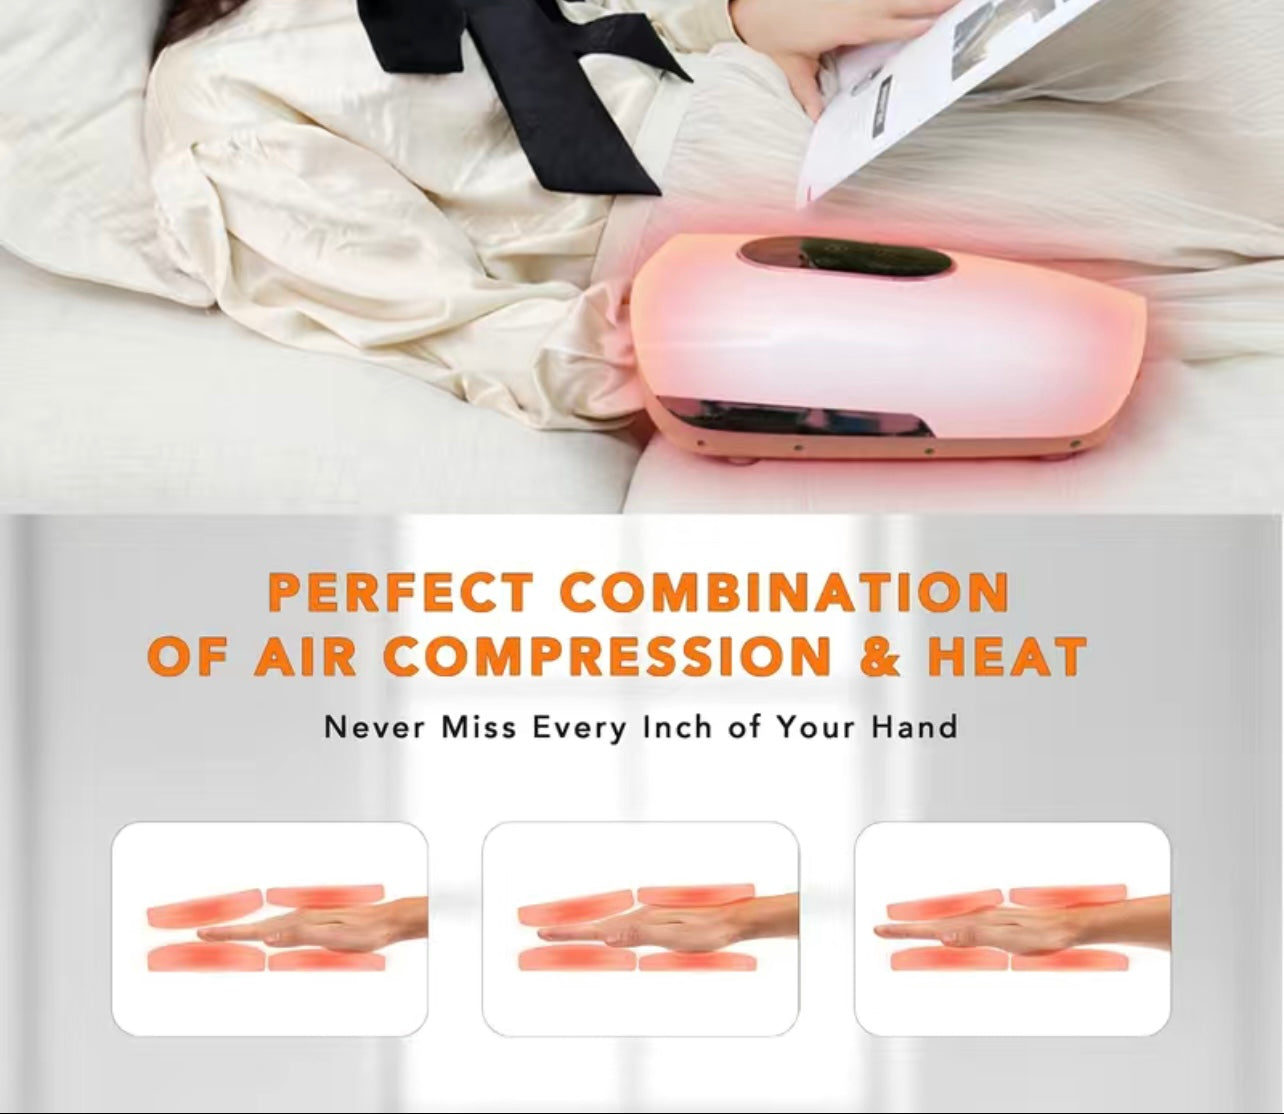 Arthritis and Carpel Tunnel Relief- Heated Compression Acupressure Hand Massager. TikTok viral best selling product, relieve hand pain, joint pain relief, correct carpal tunnel pain, avoid carpal tunnel surgery, 